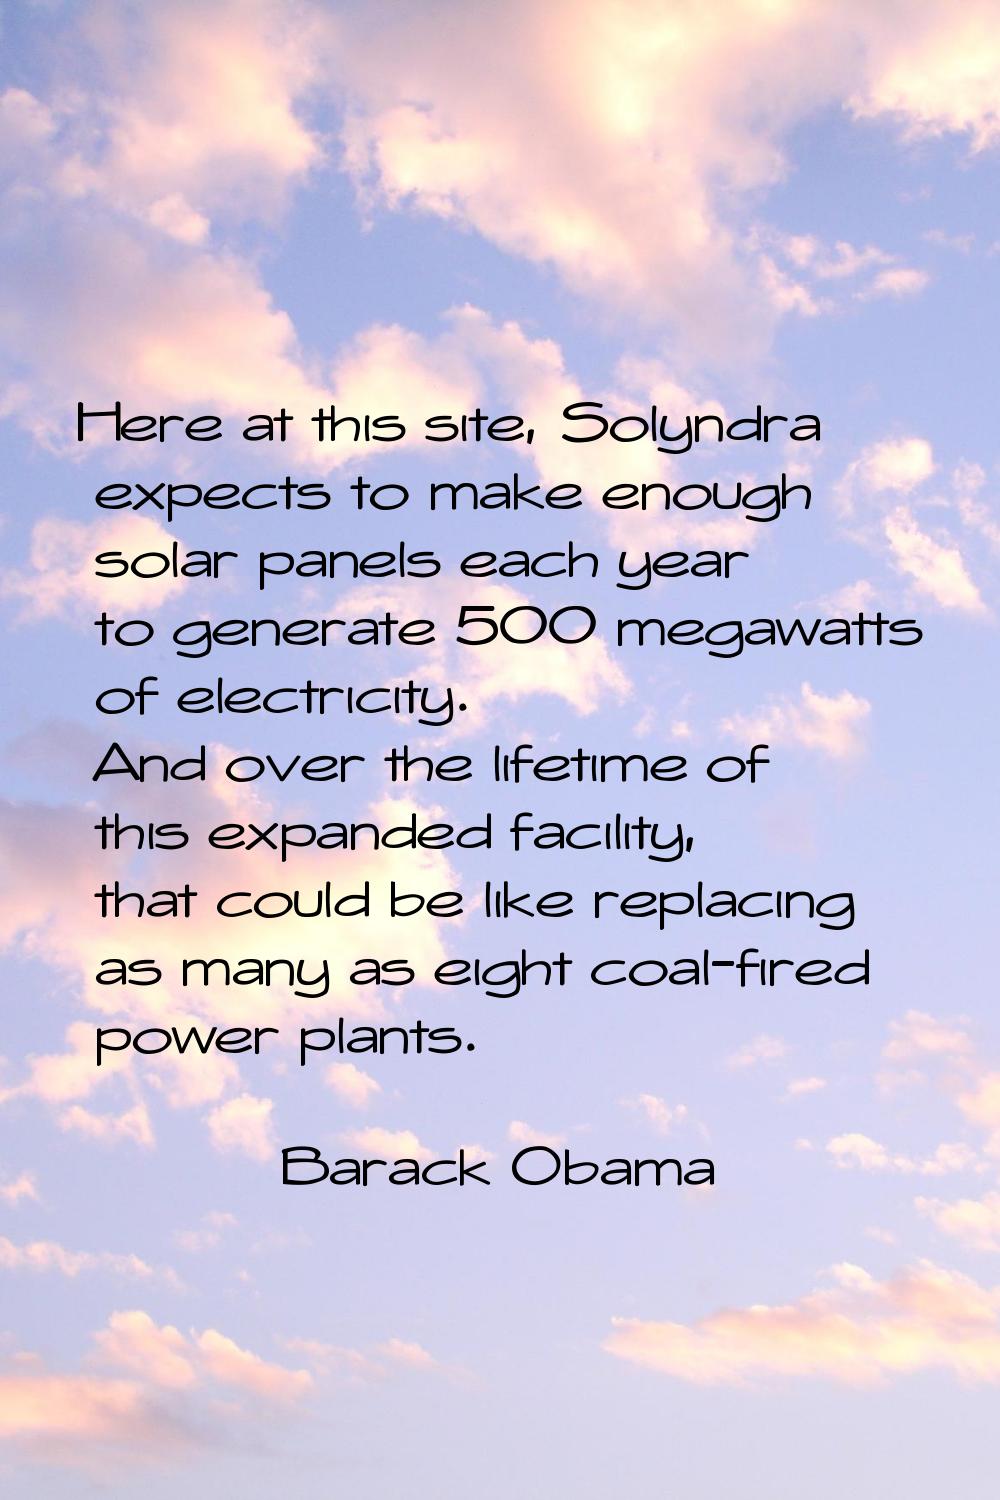 Here at this site, Solyndra expects to make enough solar panels each year to generate 500 megawatts